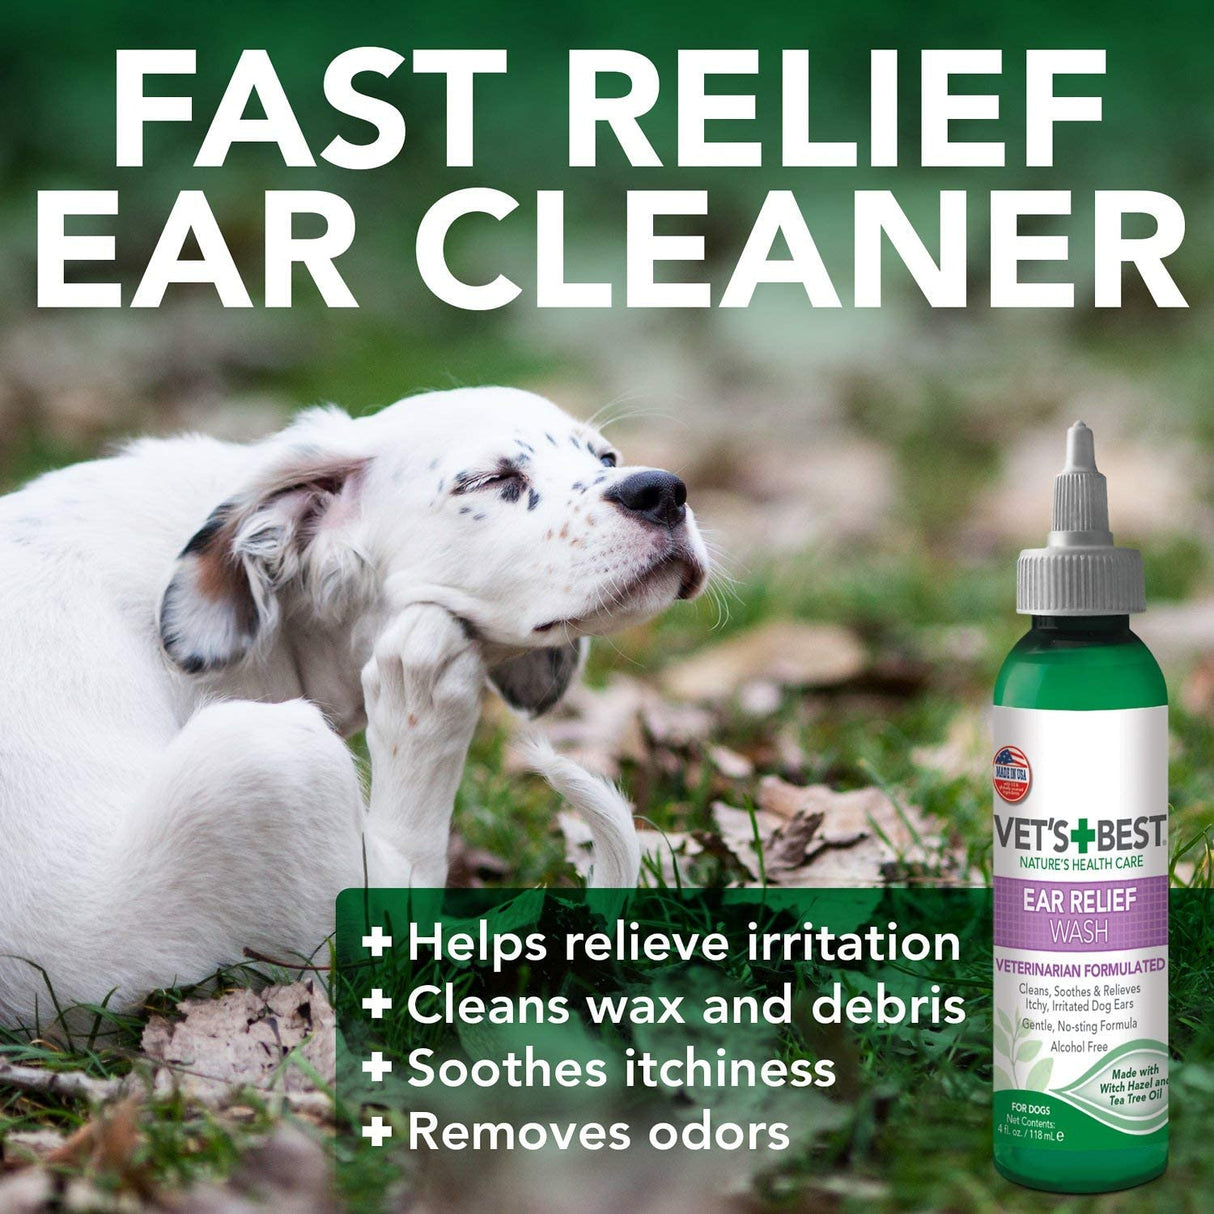 Vets Best Ear Relief Wash Natural Formula Alcohol-Free for Dogs - PetMountain.com